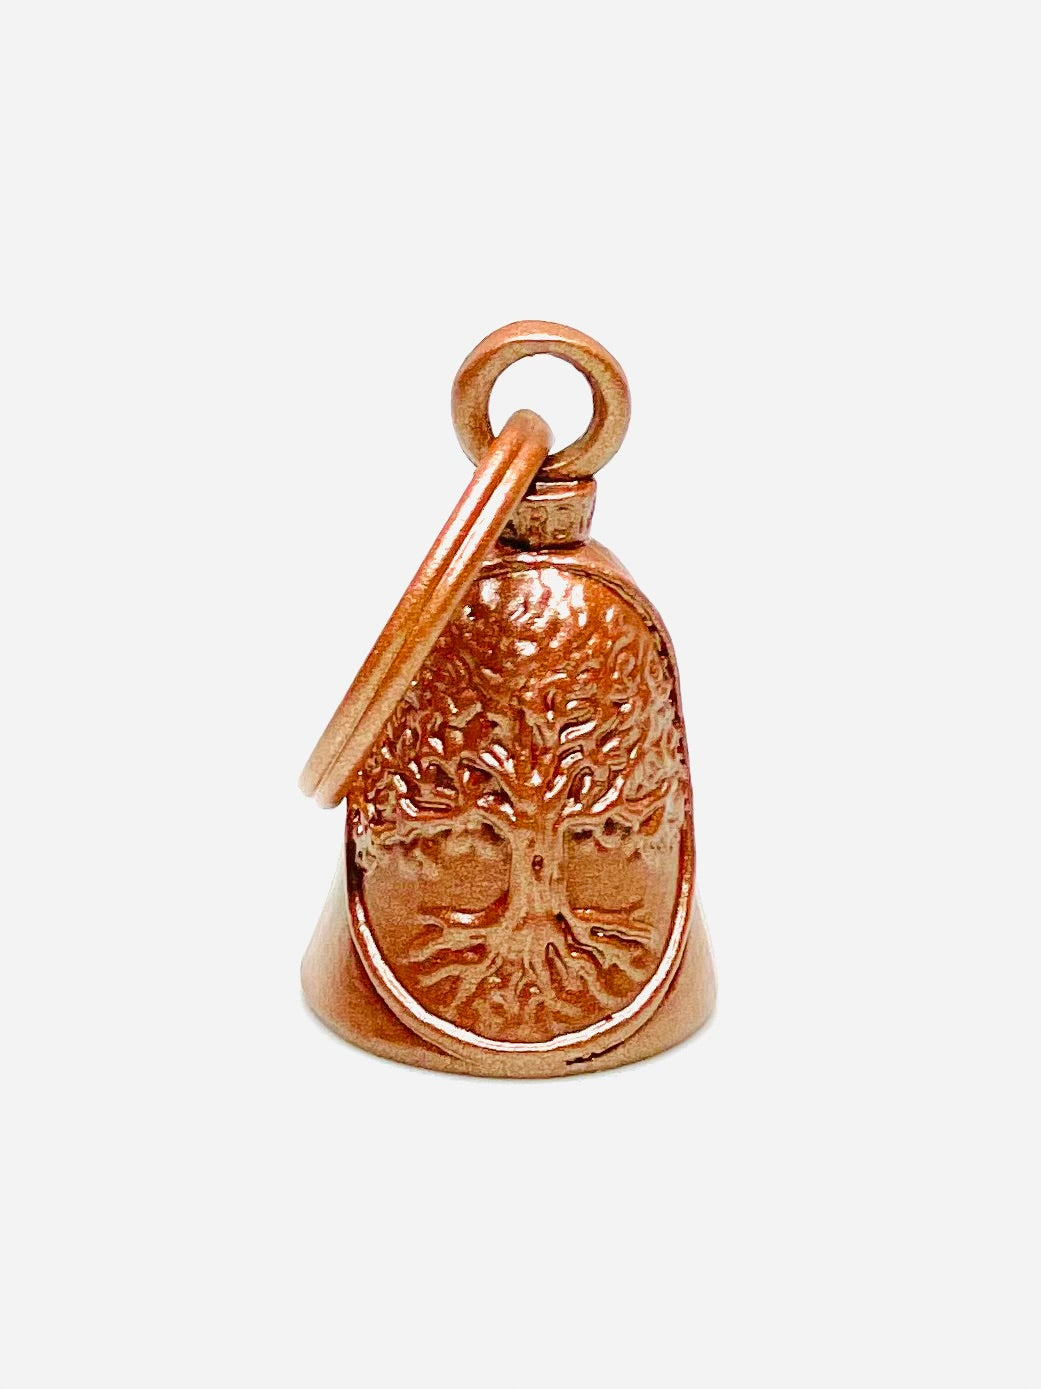 TREE OF LIFE GUARDIAN BELL - COPPER